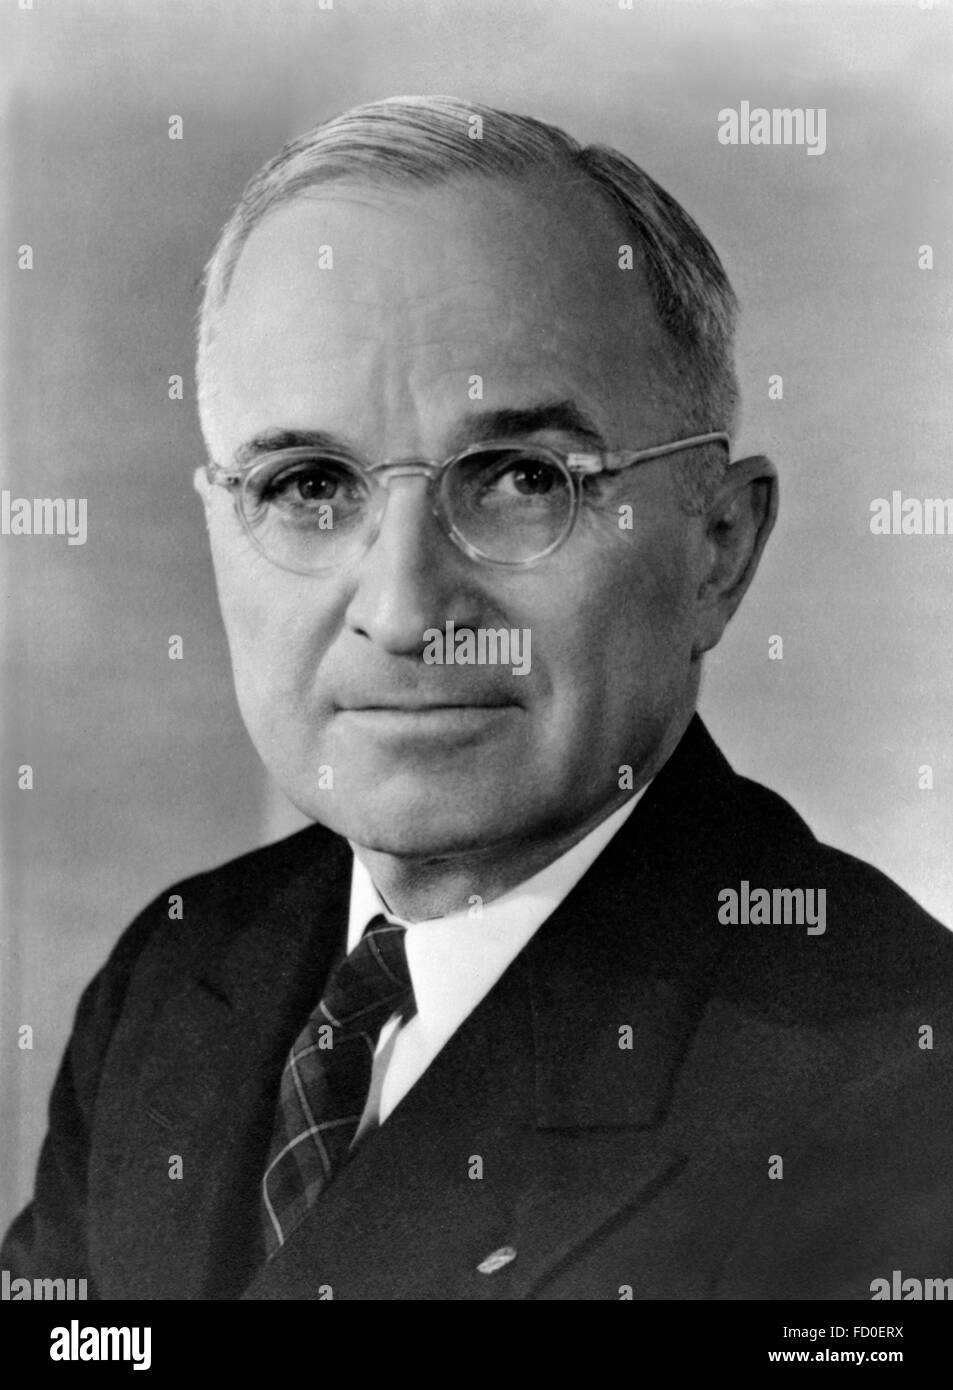 Harry S Truman, portrait of the 33rd President of the USA, c.1945 Stock Photo